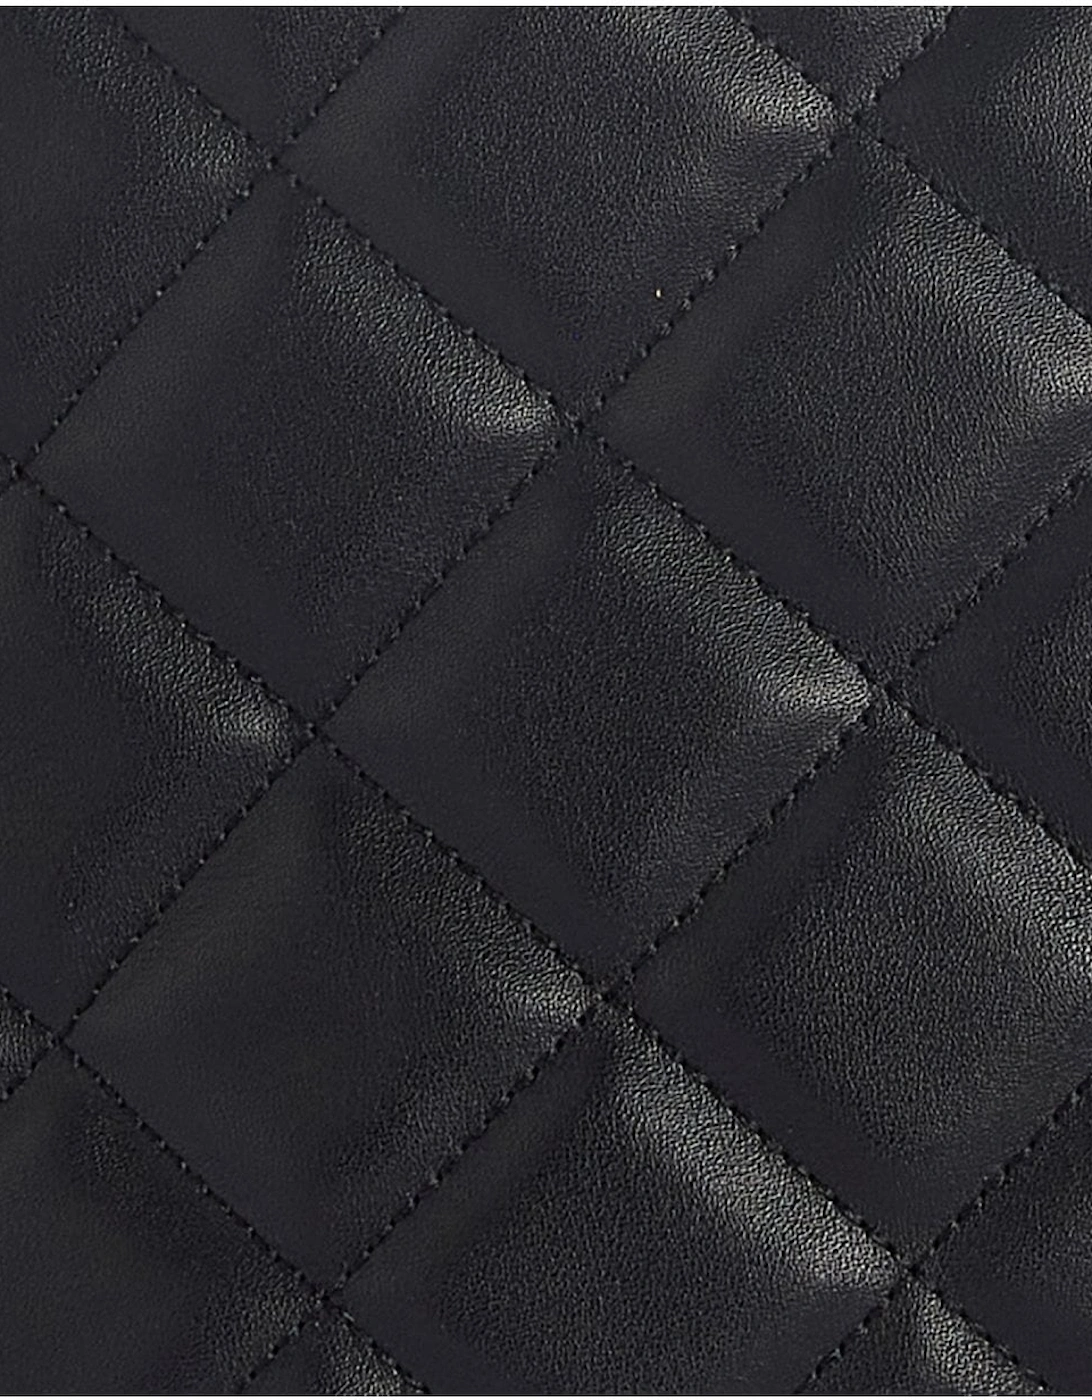 Quilted Hoxton Womens Backpack